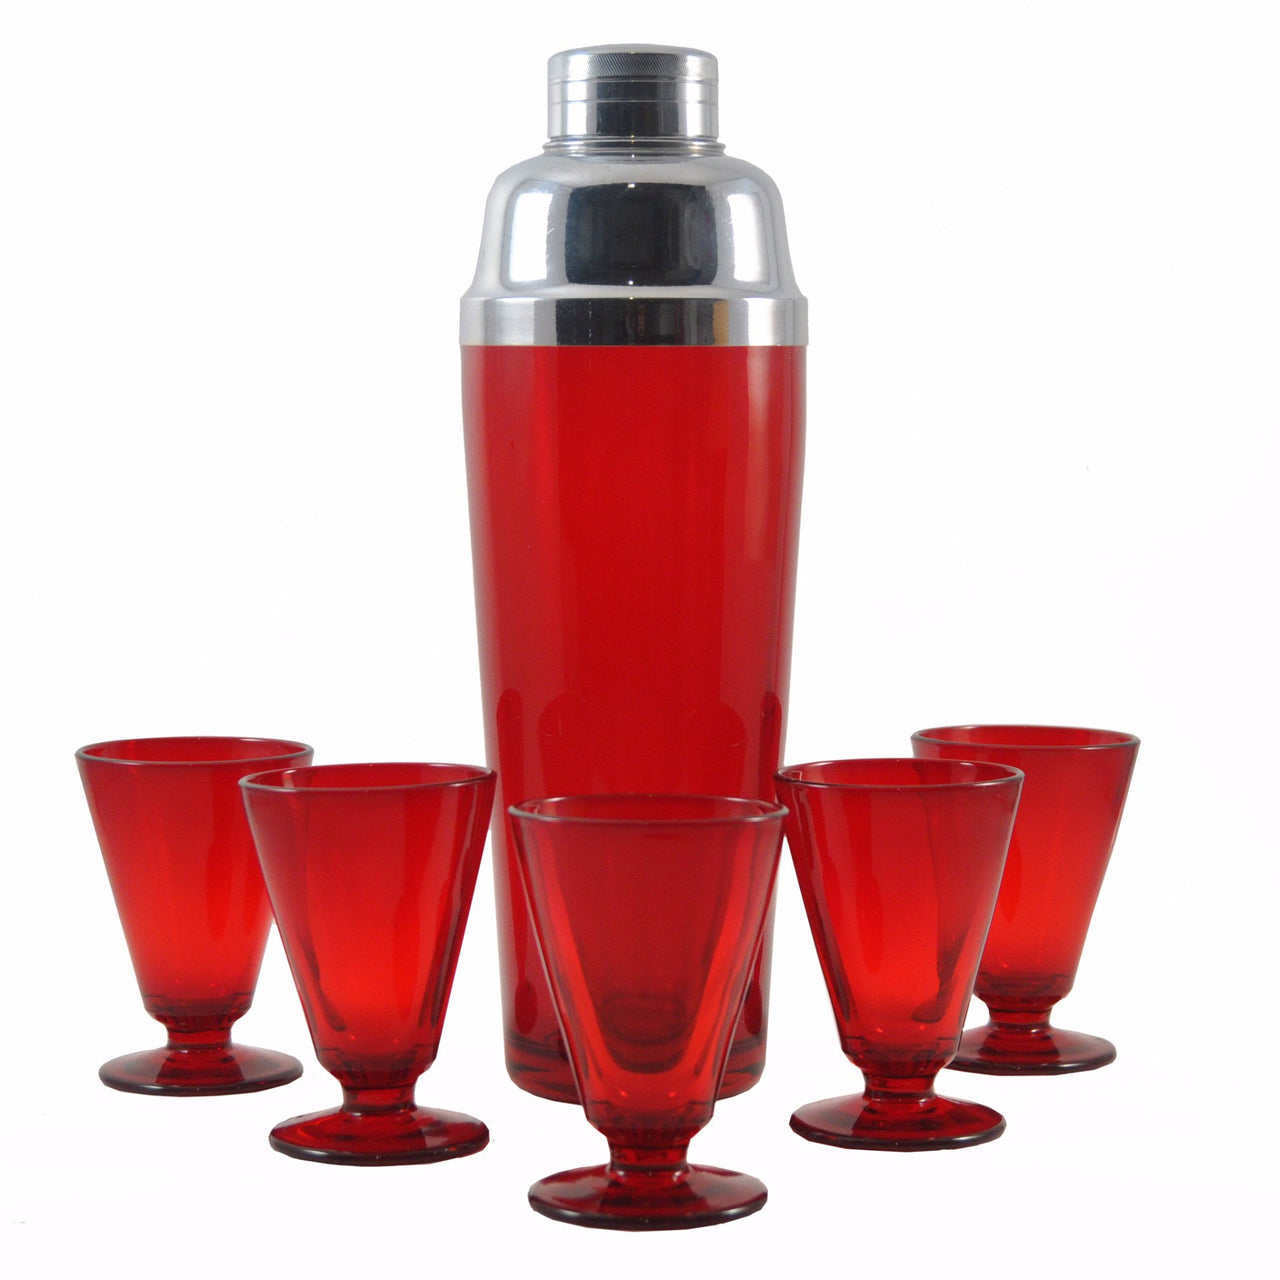 Ruby Red Glass Deco Vintage Cocktail Shaker Set, The Hour